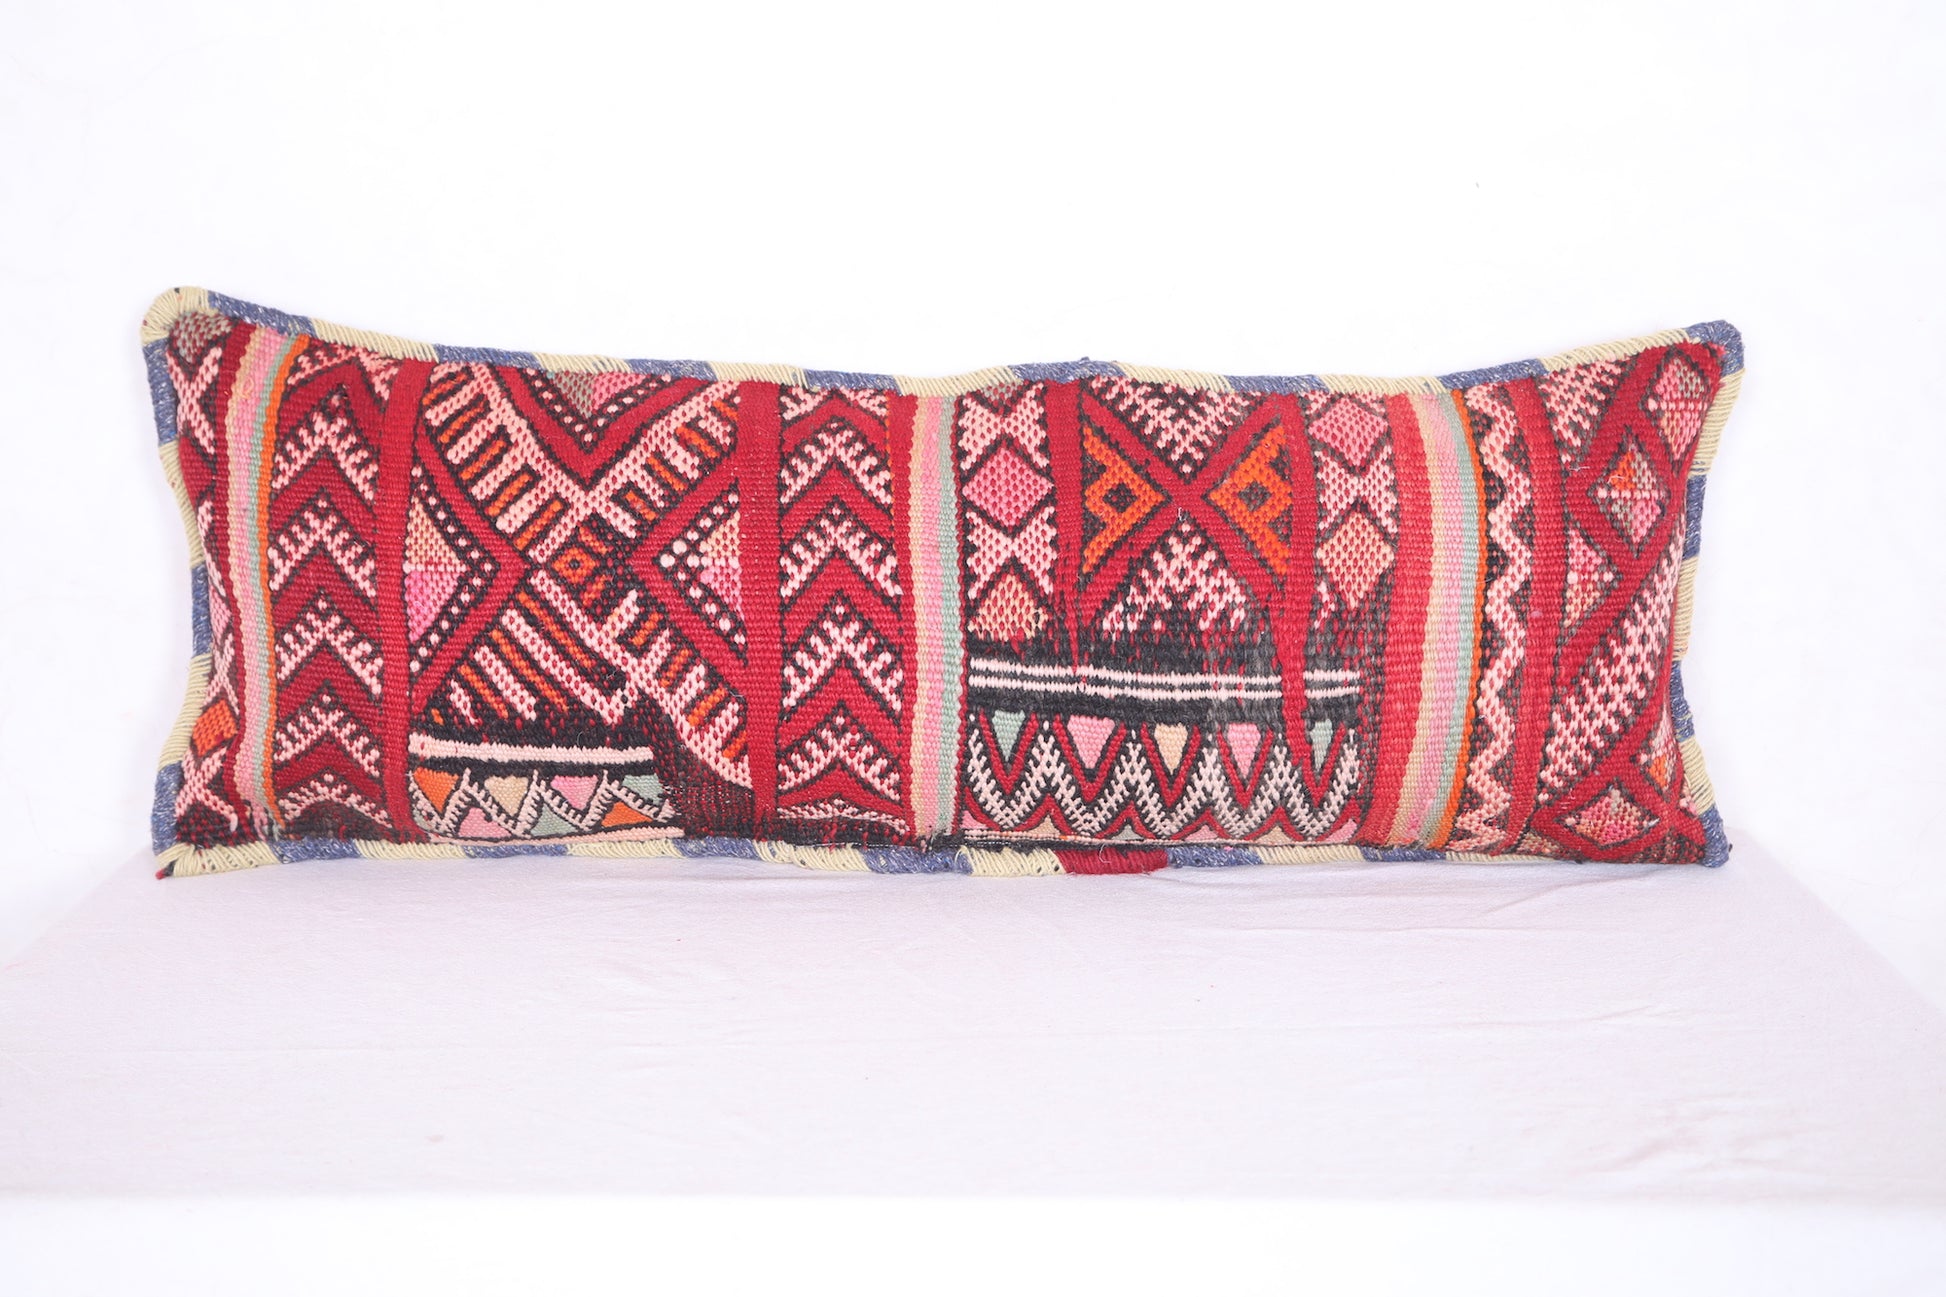 Moroccan handmade kilim pillow 14.9 INCHES X 39.7 INCHES